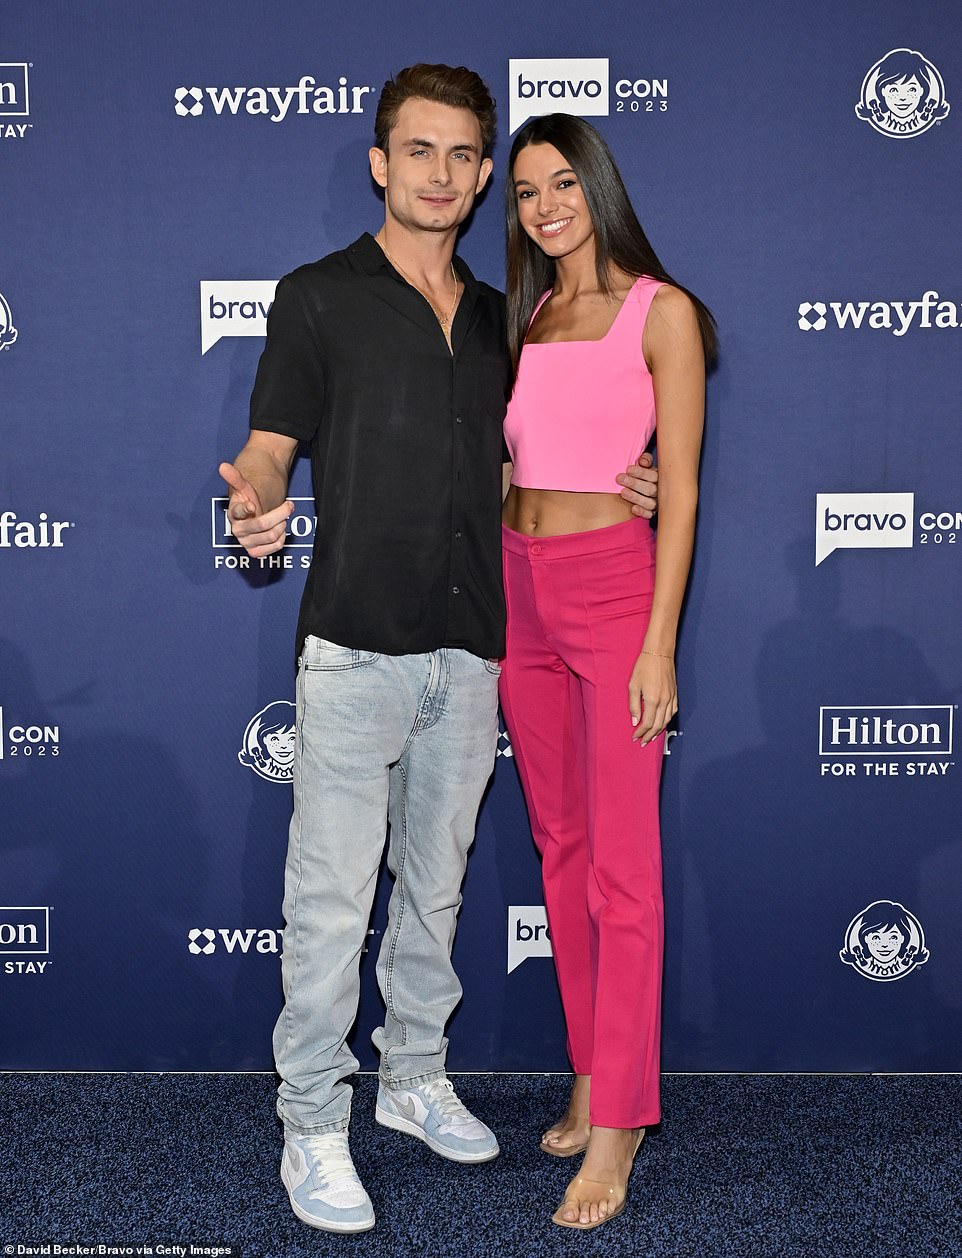 Still going strong! Also serving up looks on the third and final day of Bravo Network's annual fan convention were James Kennedy and his girlfriend since January 2022, Ally Lewber